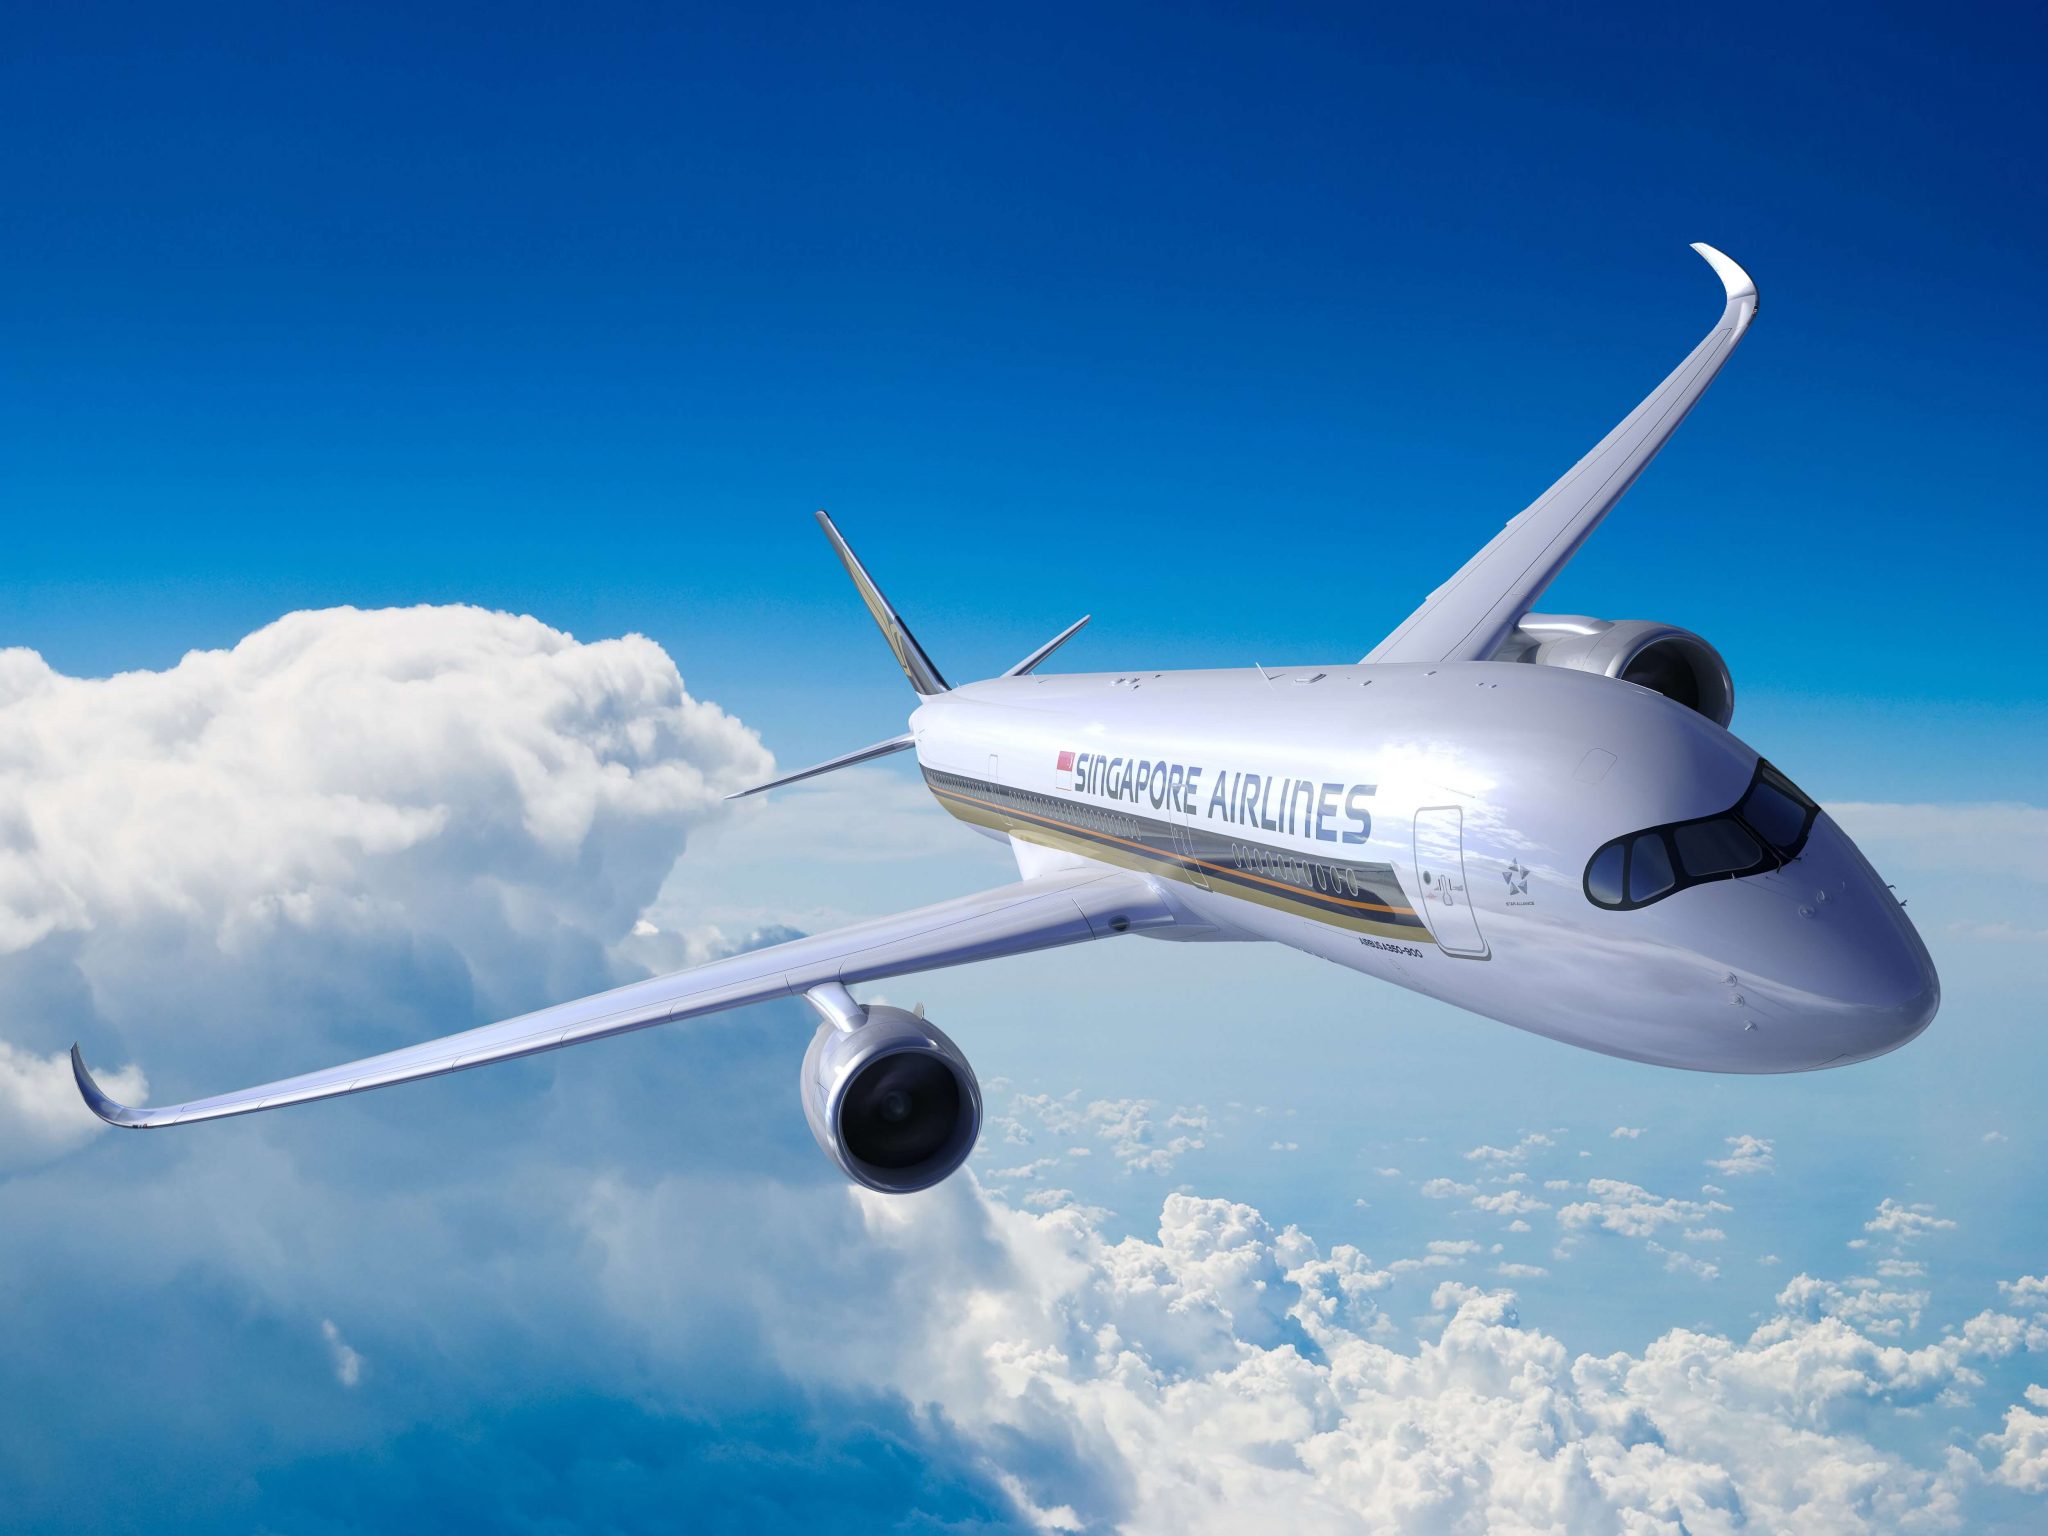 Singapore Airlines to launch world’s longest commercial flights